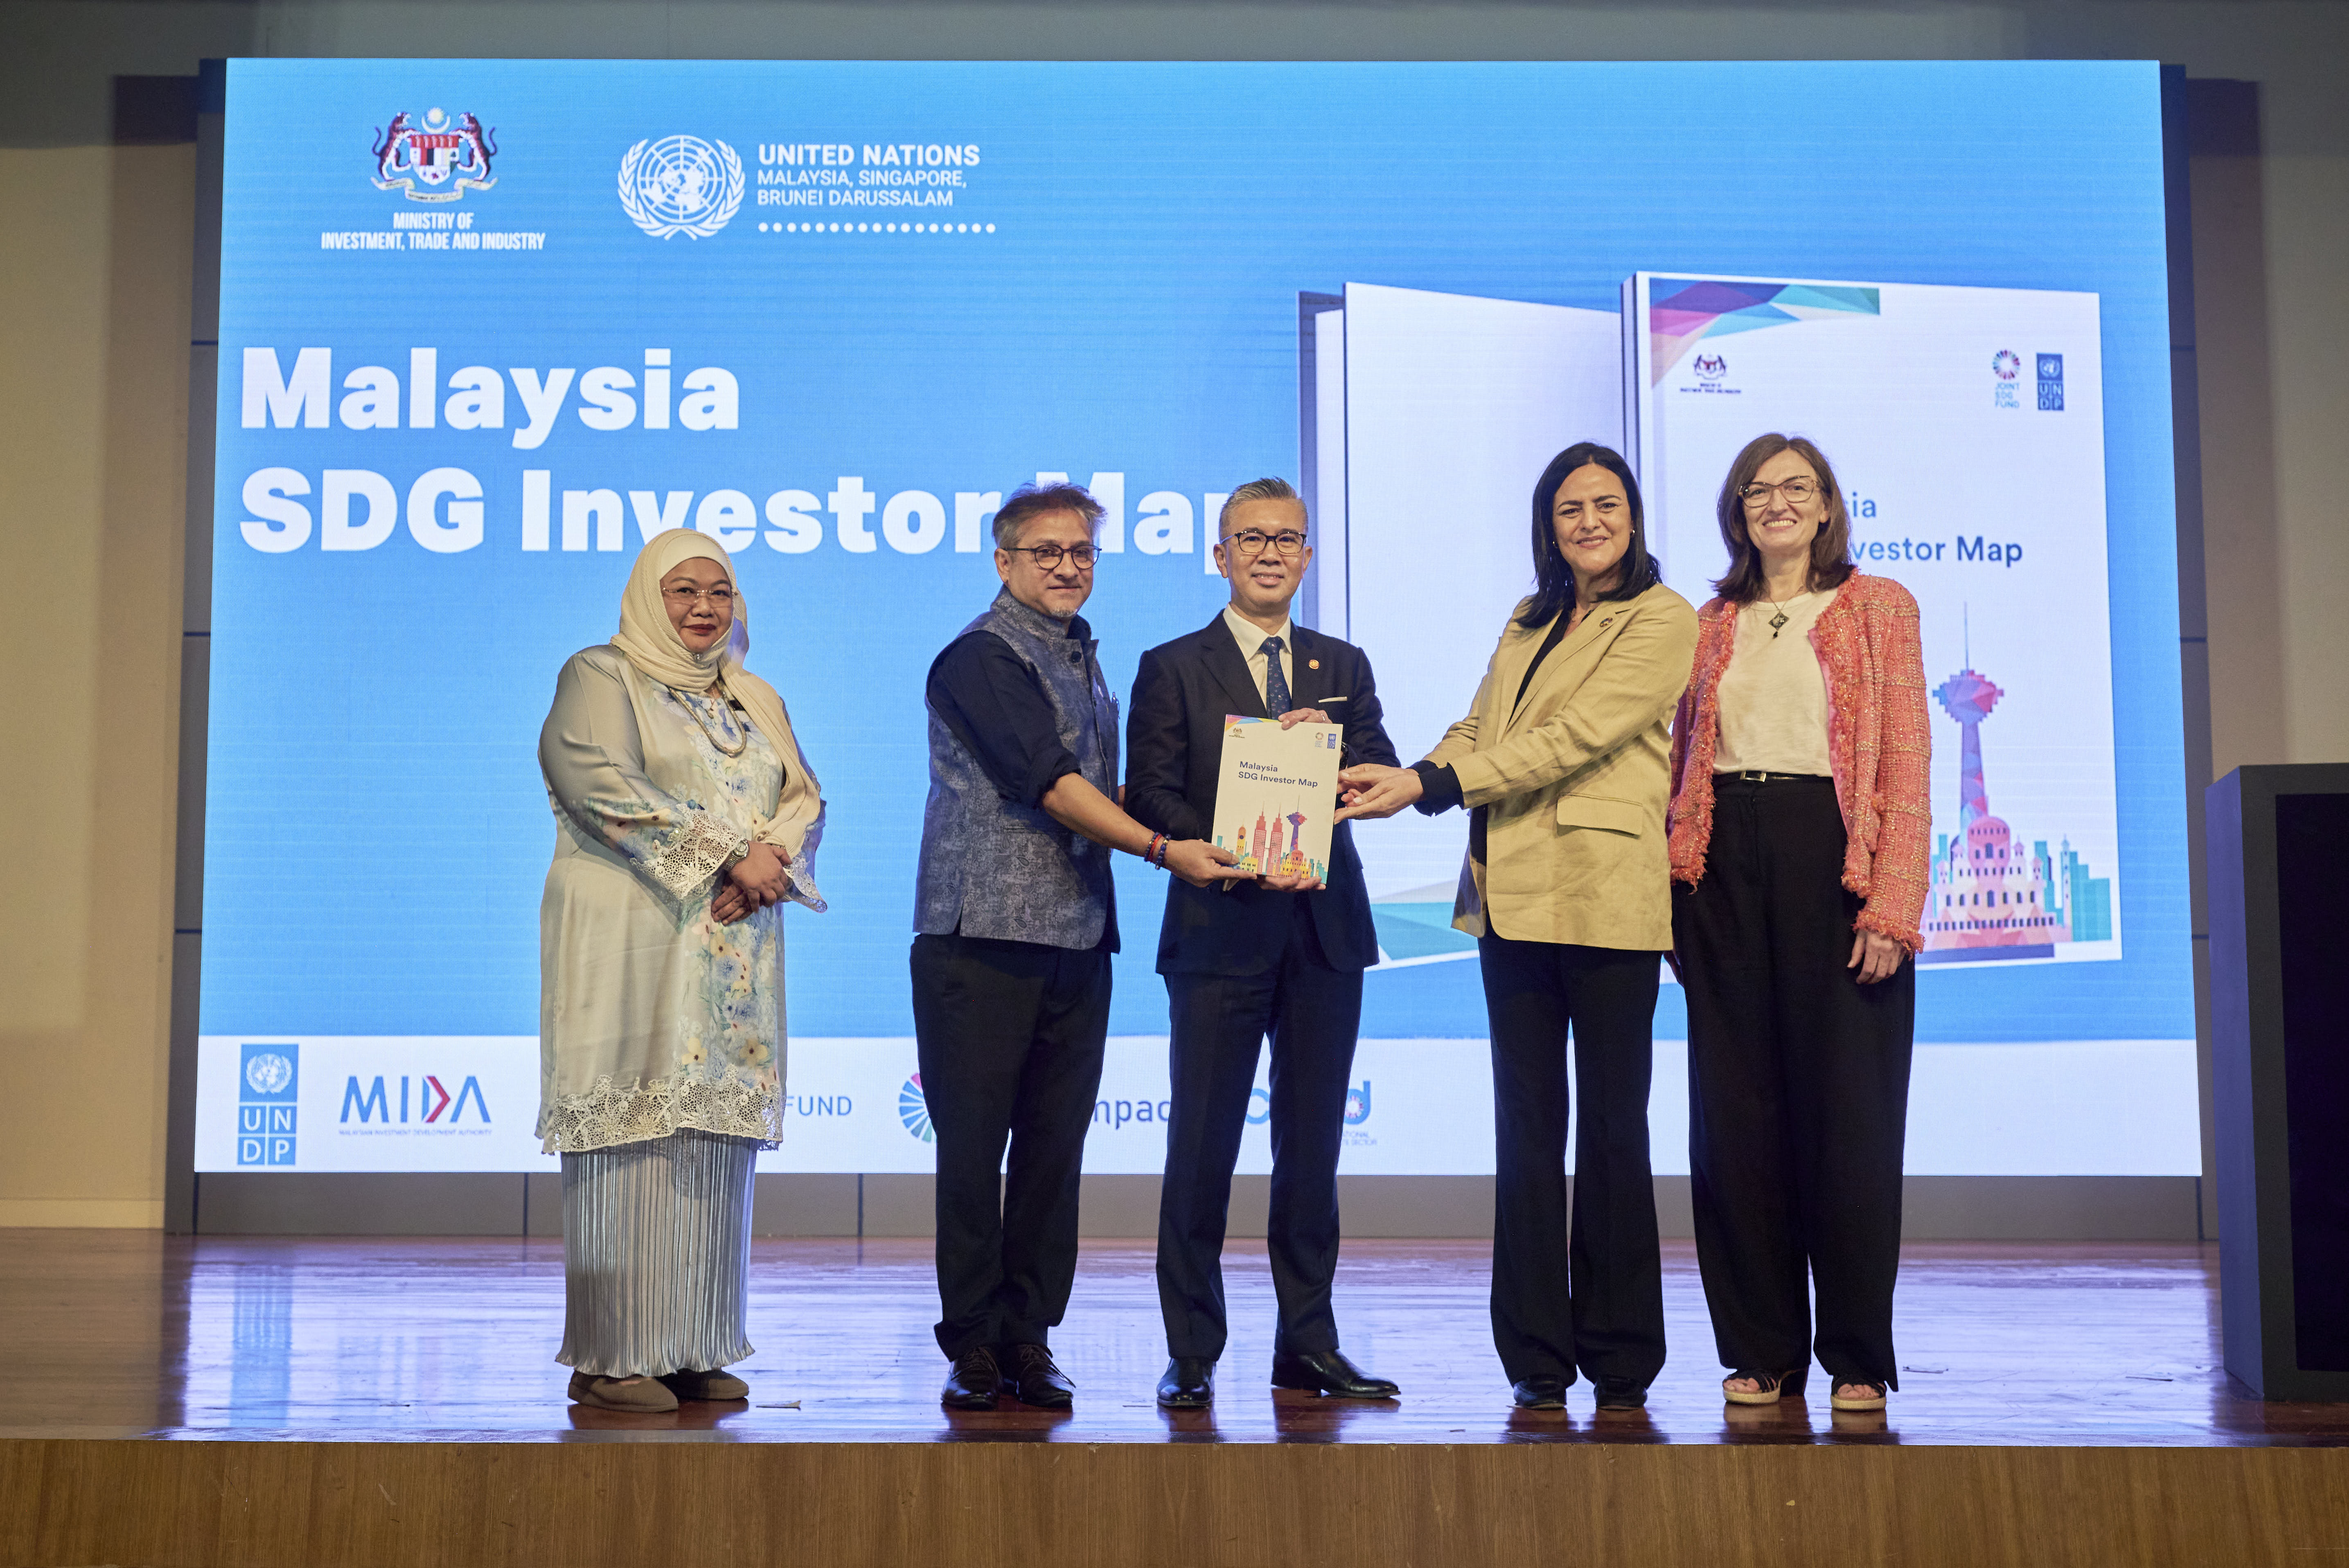 Launch of the Malaysia SDG Investor Map